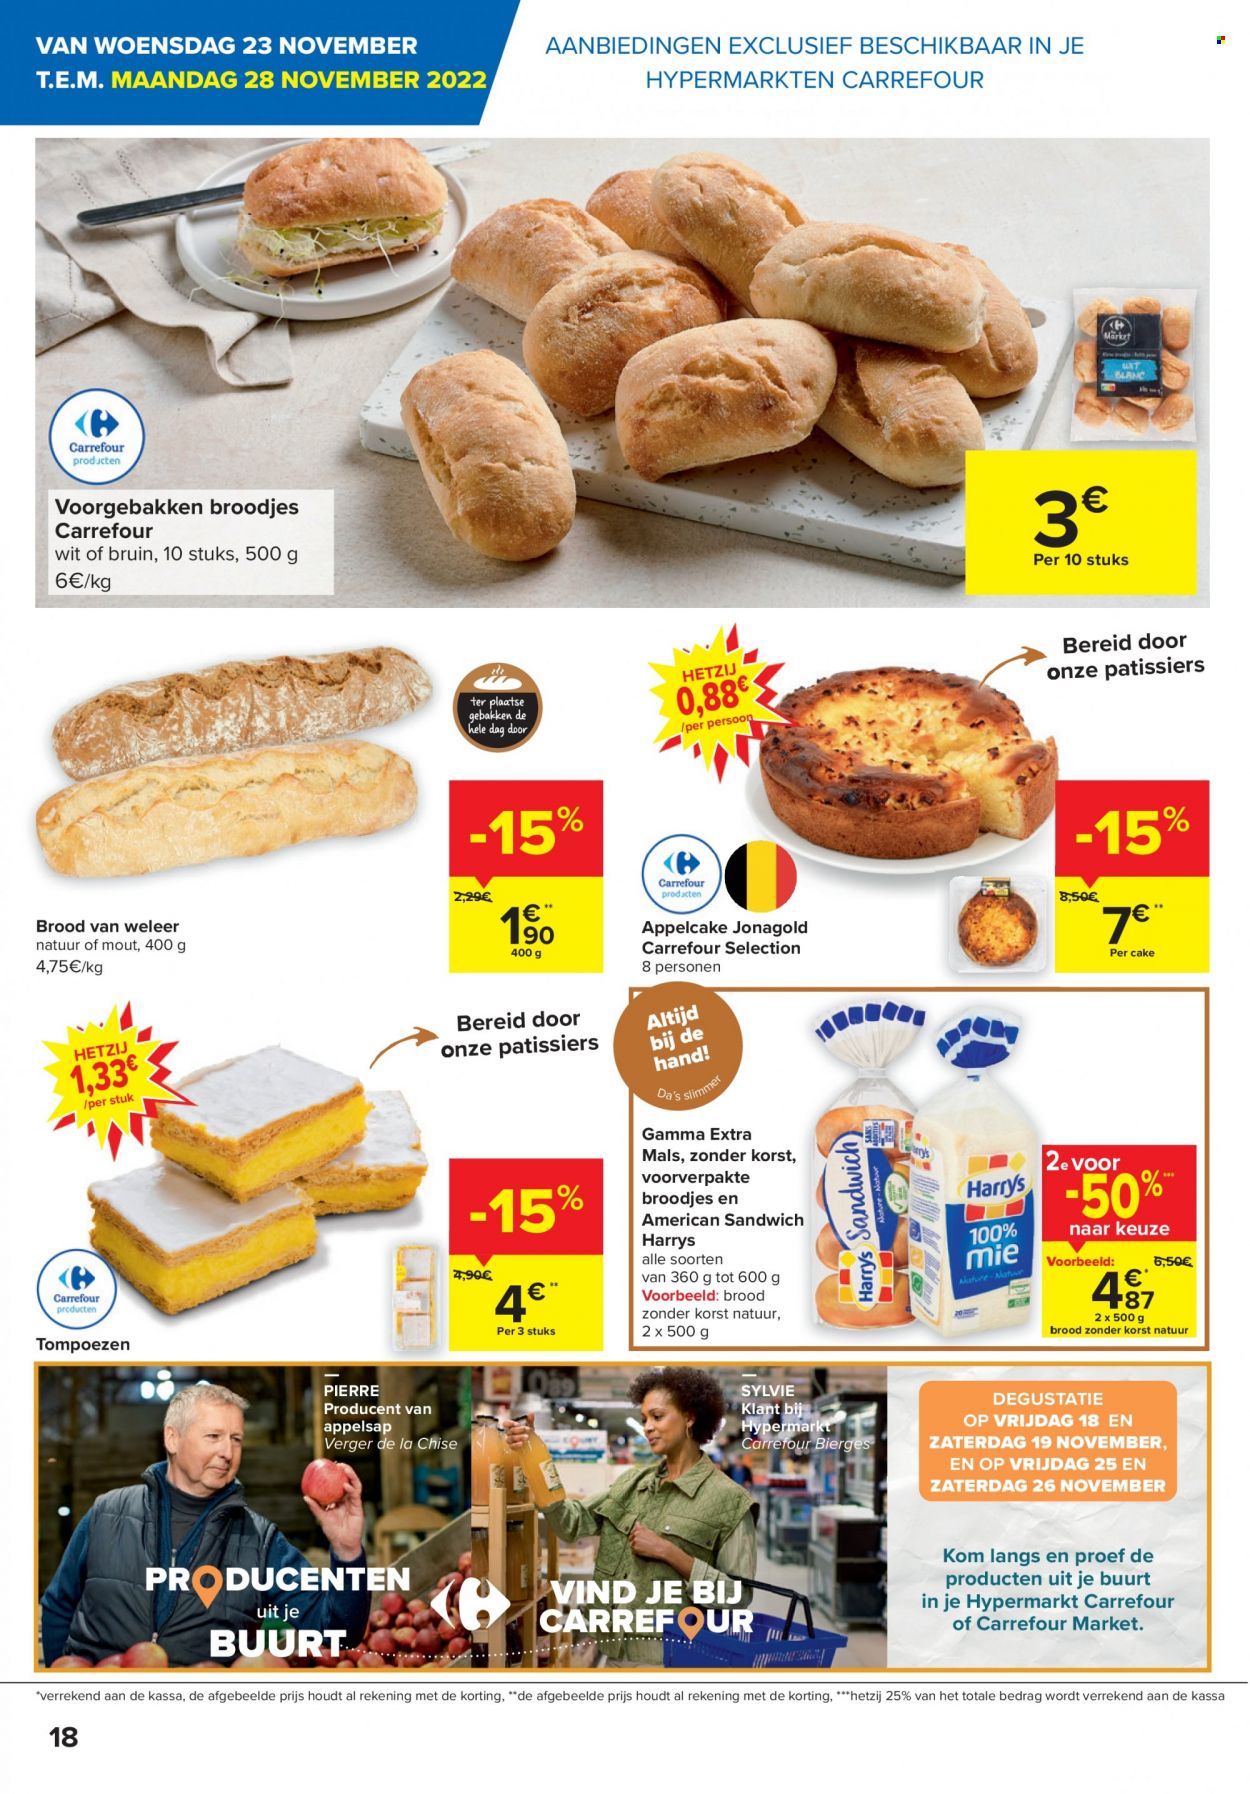 Catalogue Carrefour hypermarkt - 23.11.2022 - 5.12.2022. Page 18.